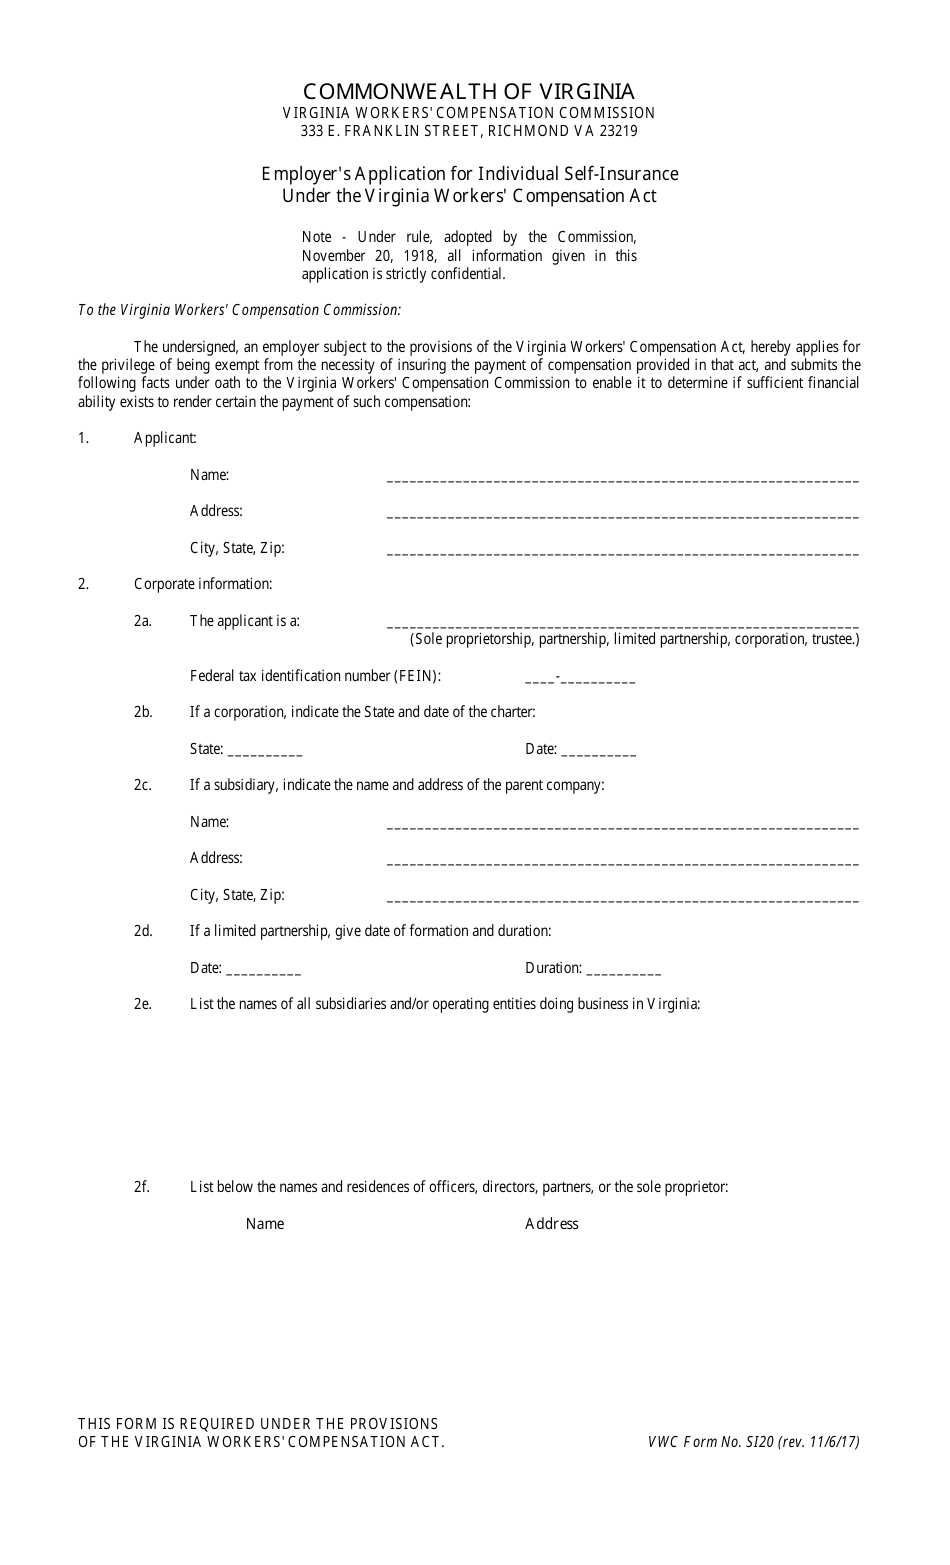 VWC Form SI20 Employers Application for Individual Self-insurance Under the Virginia Workers Compensation Act - Virginia, Page 1